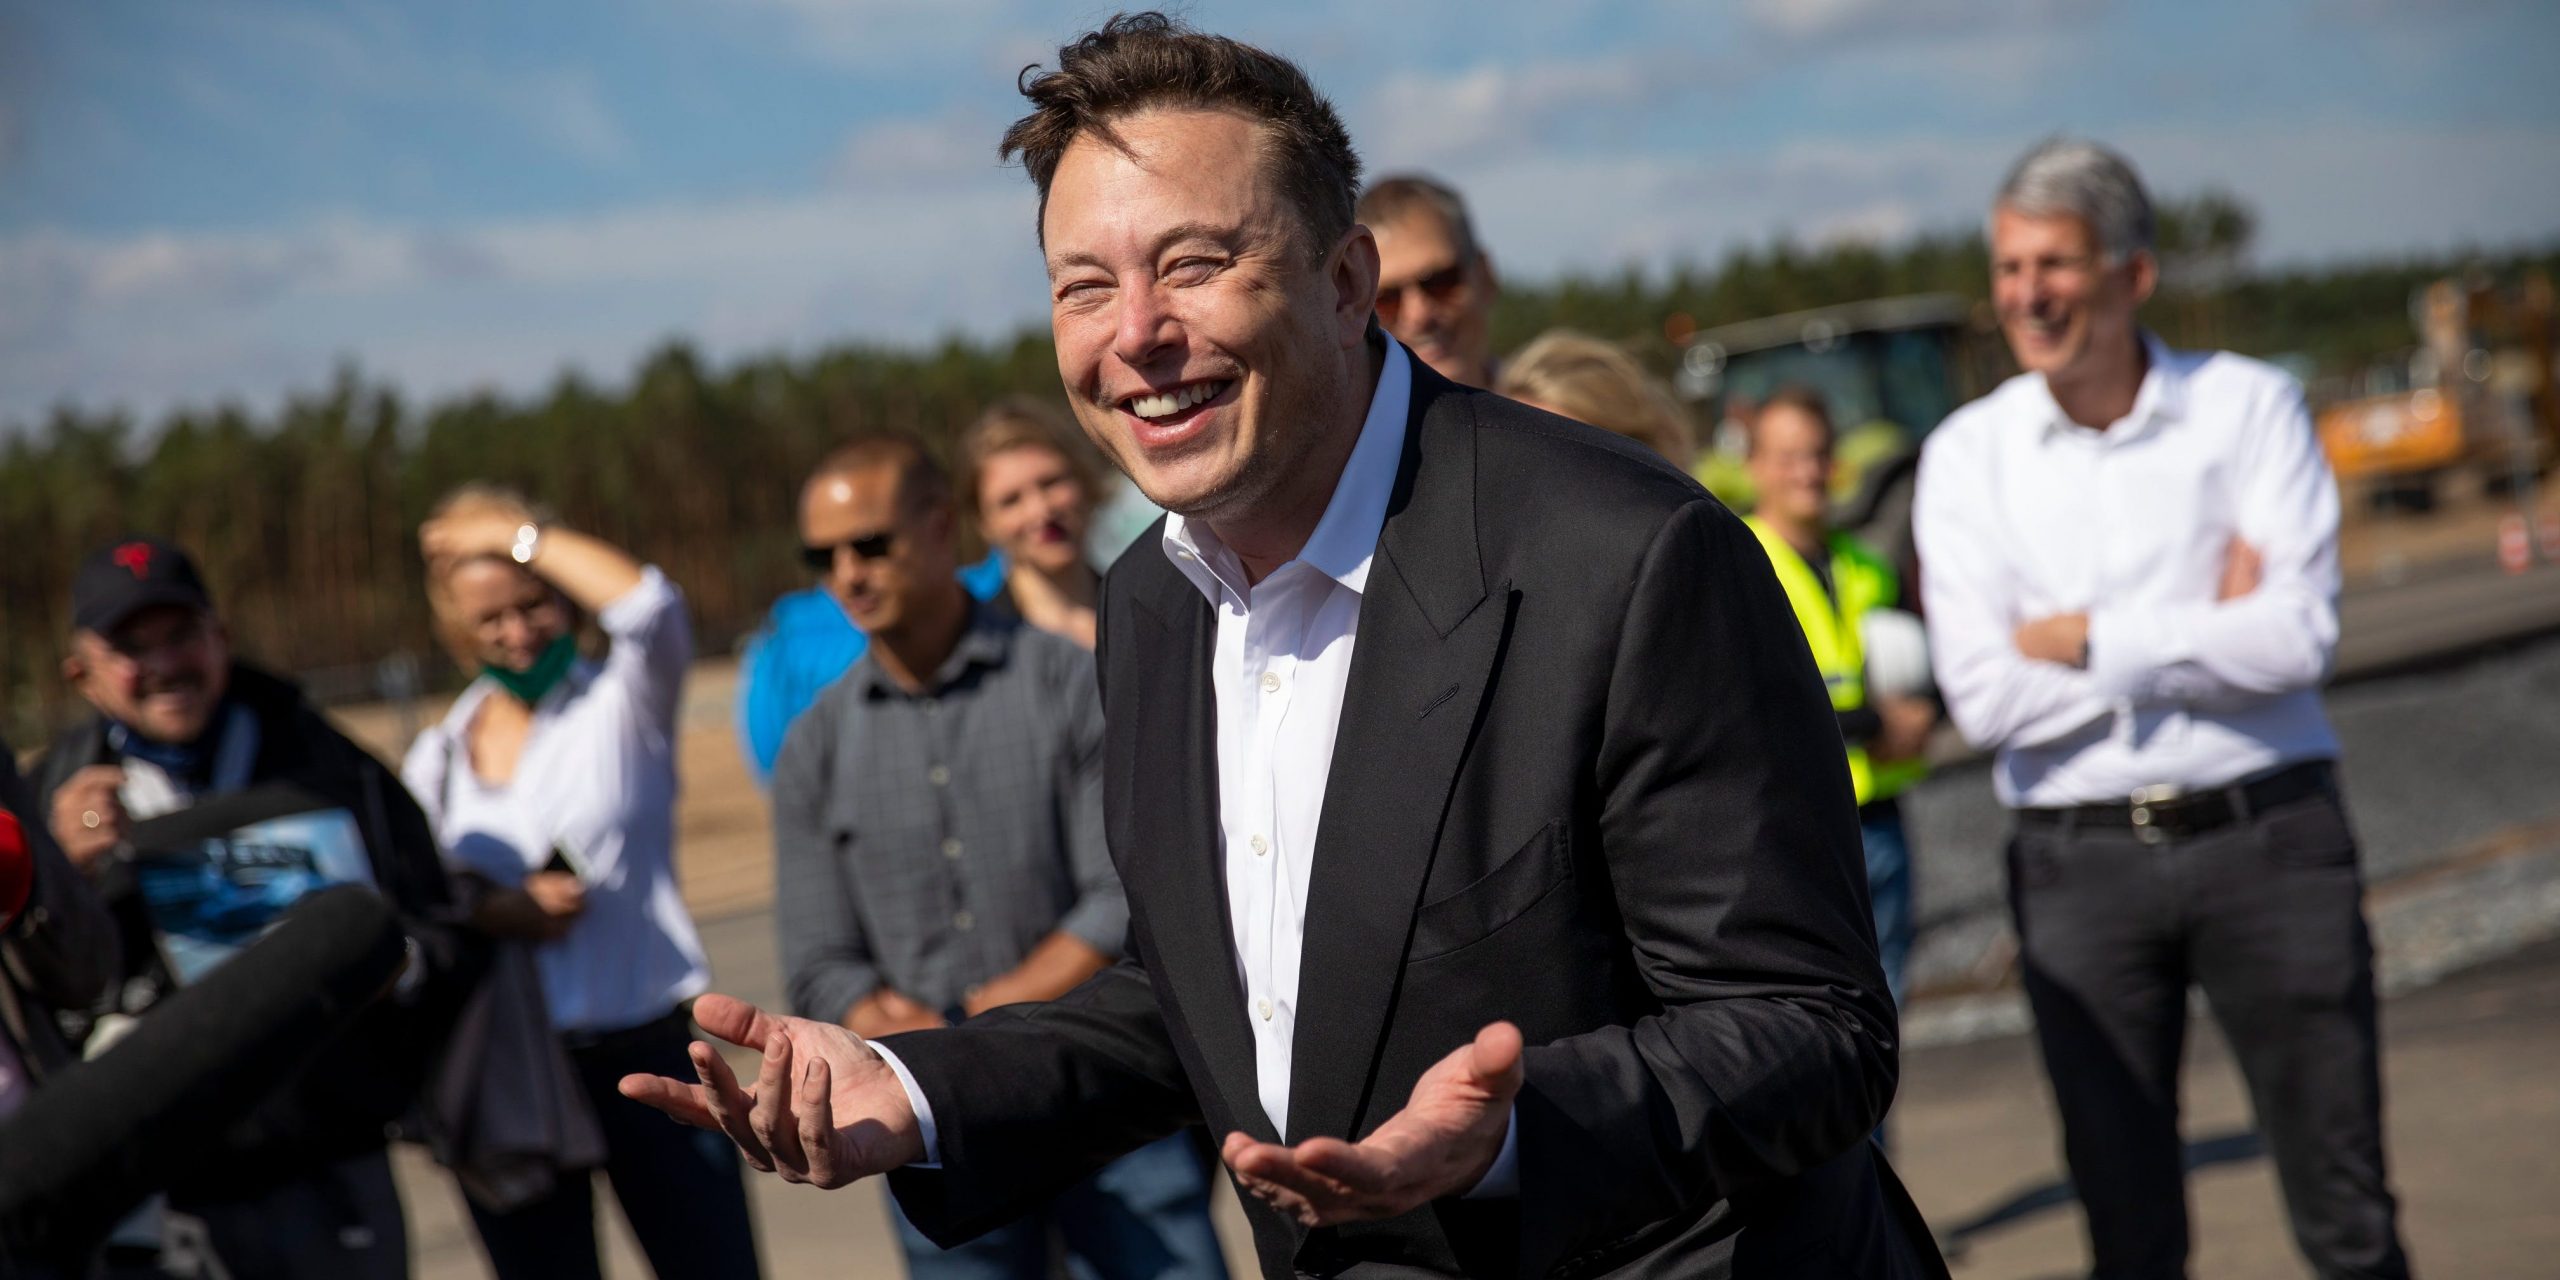 Tesla head Elon Musk talks to the press as he arrives to to have a look at the construction site of the new Tesla Gigafactory near Berlin